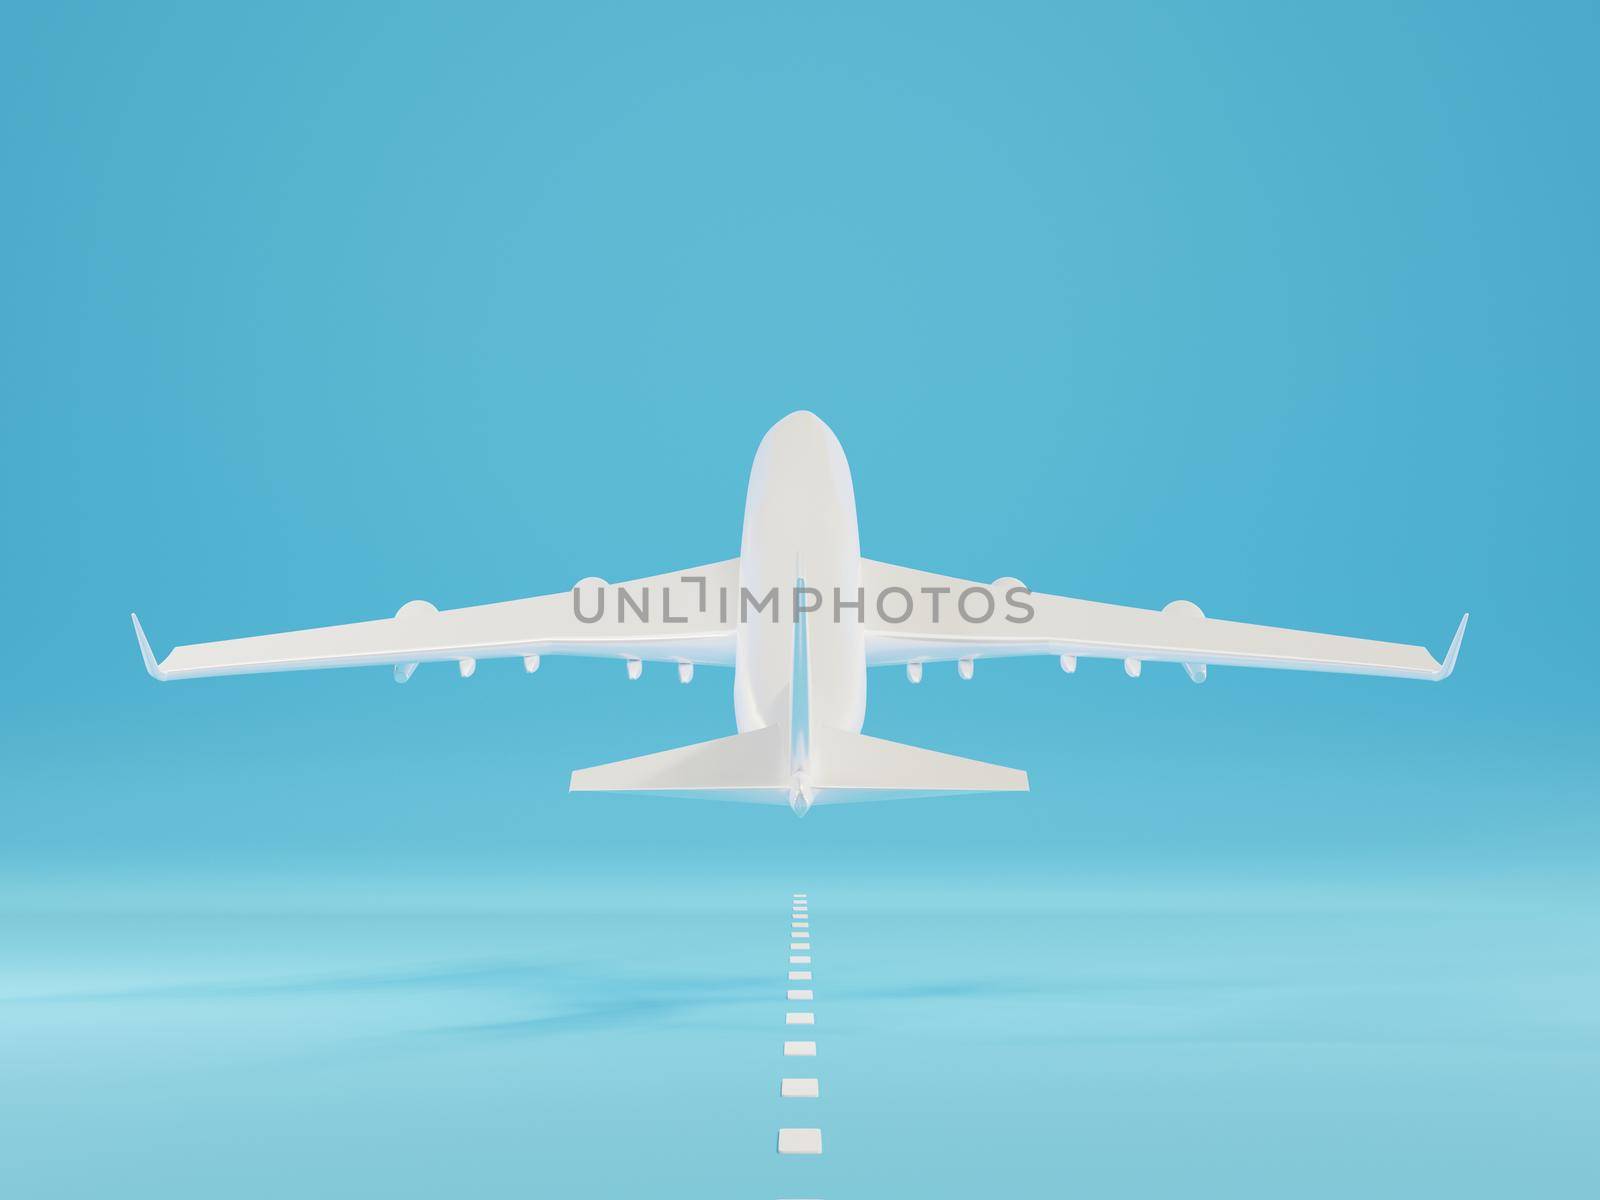 Airplane landing or taking off over ground on runway from the airport, Large jet plane takeoff on blue background, business travel flight concept, 3D rendering illustration